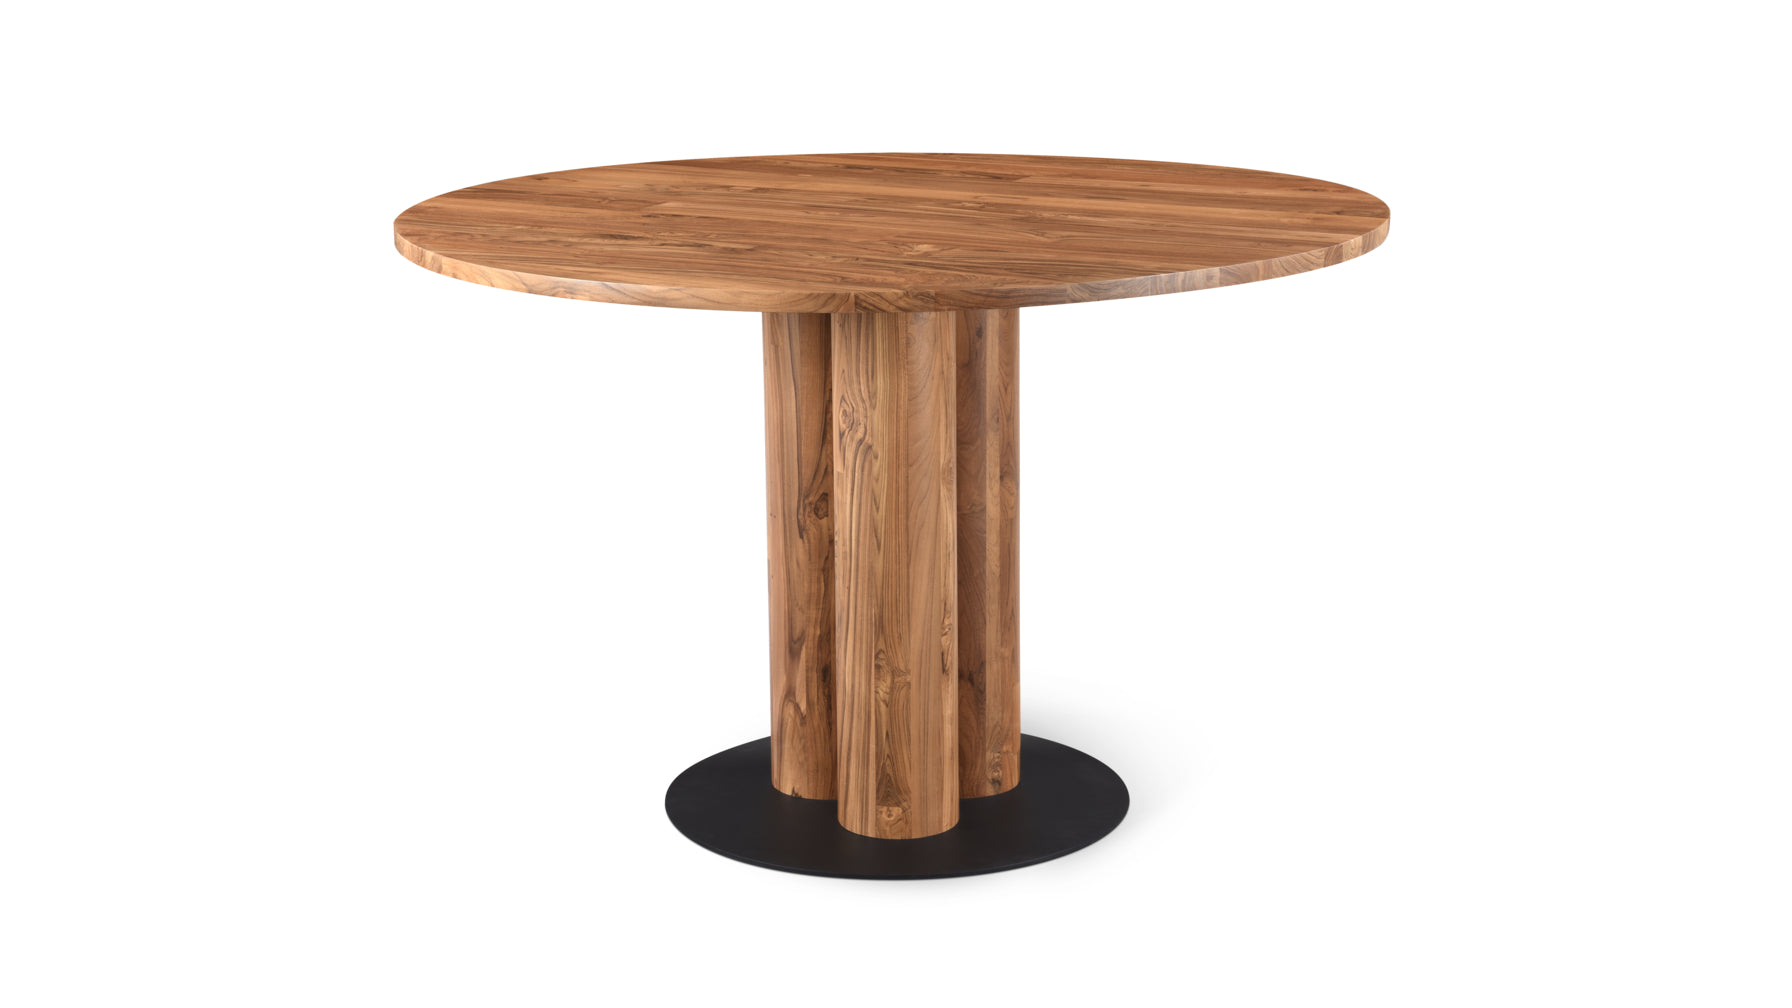 Formation Outdoor Dining Table, Seats 4-5 People, Teak - Image 1